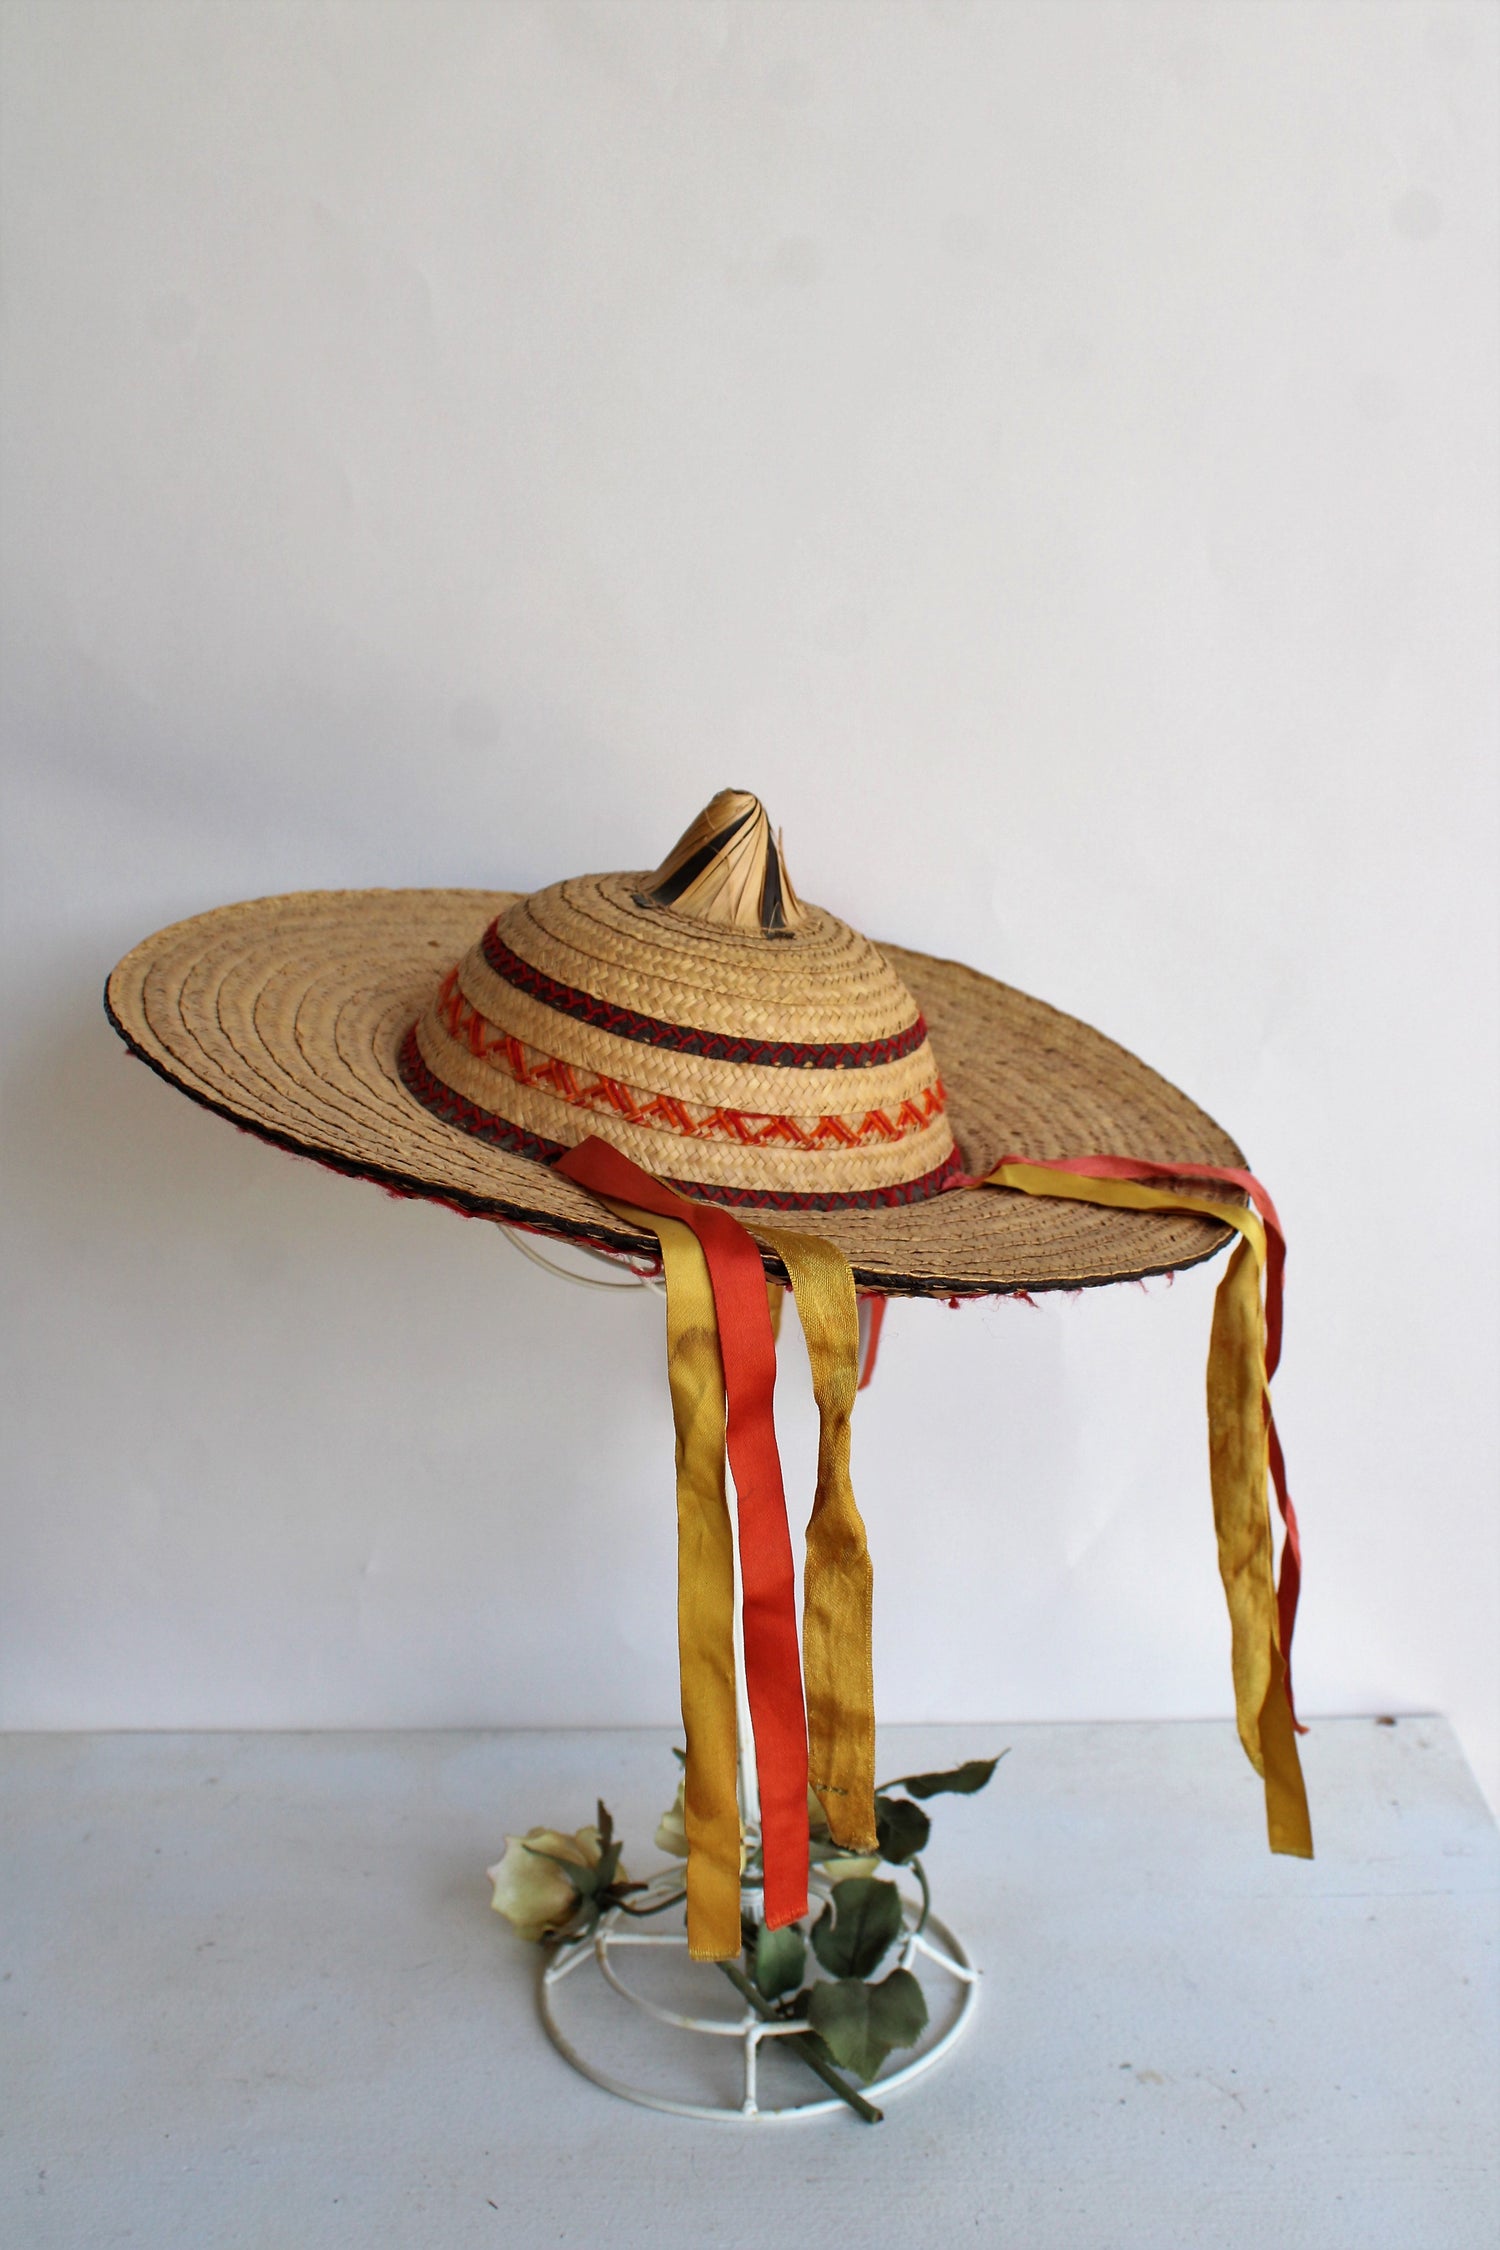 Vintage 1950s Woven Asian Conical Straw Hat